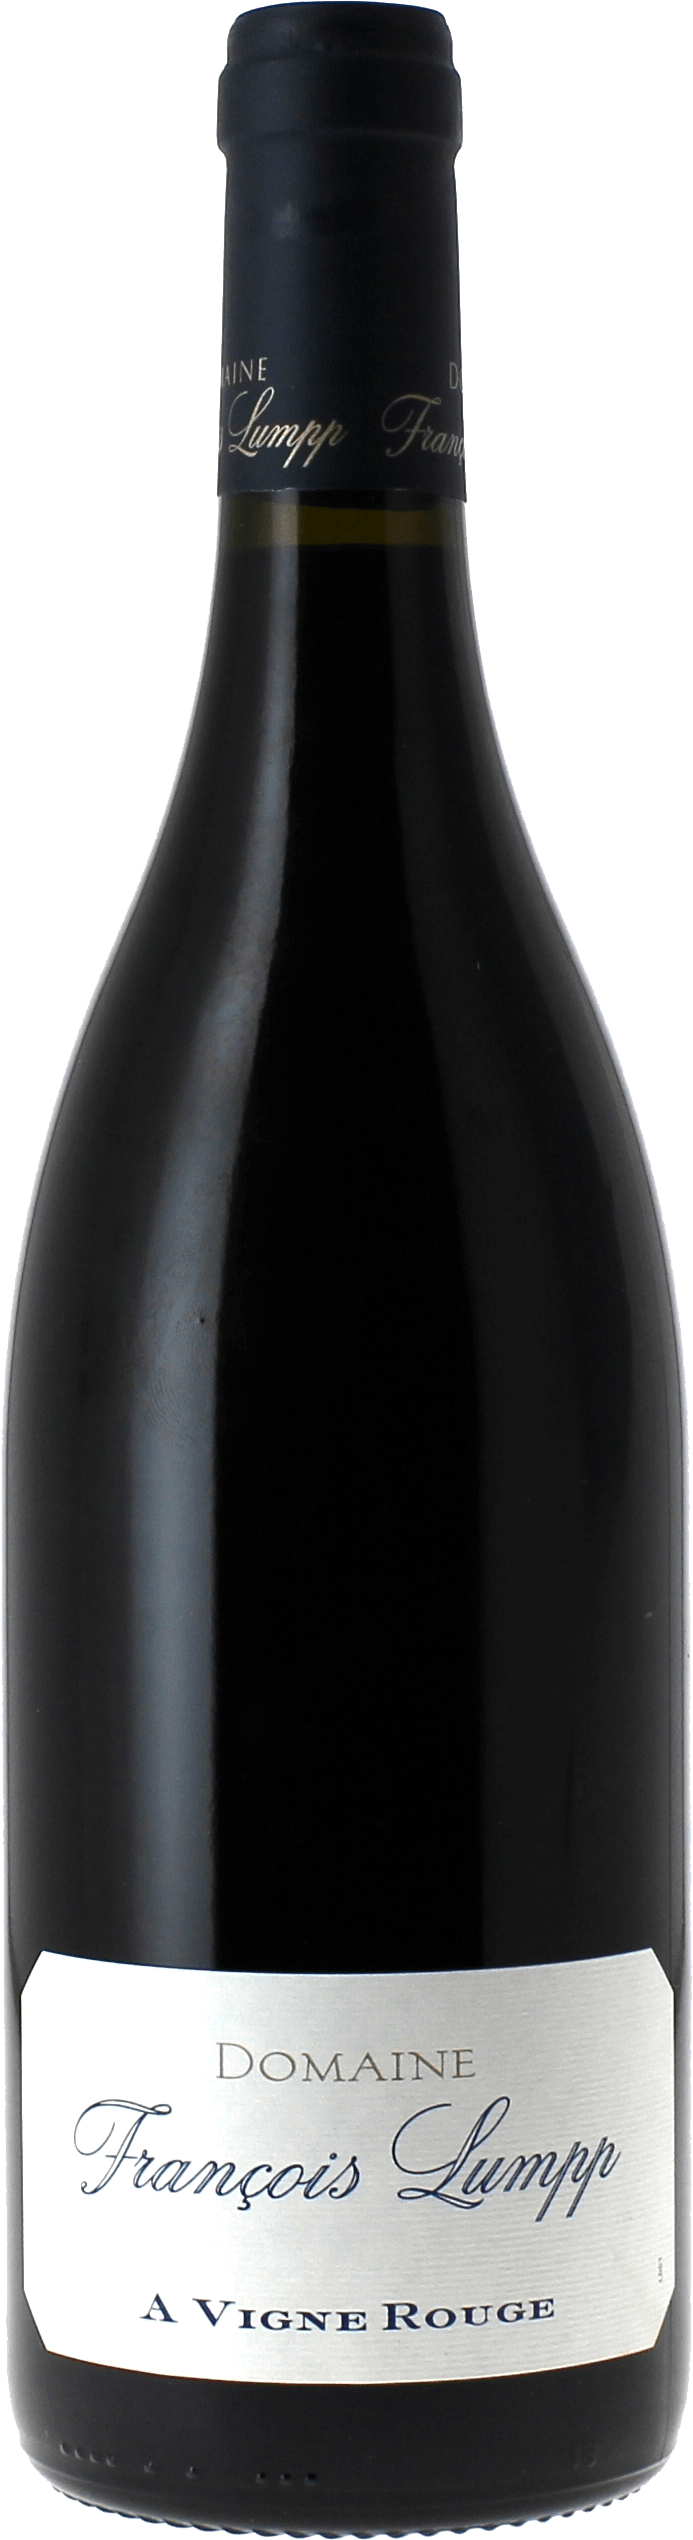 Givry 1er cru a vigne rouge 2017 Domaine LUMPP, Bourgogne rouge